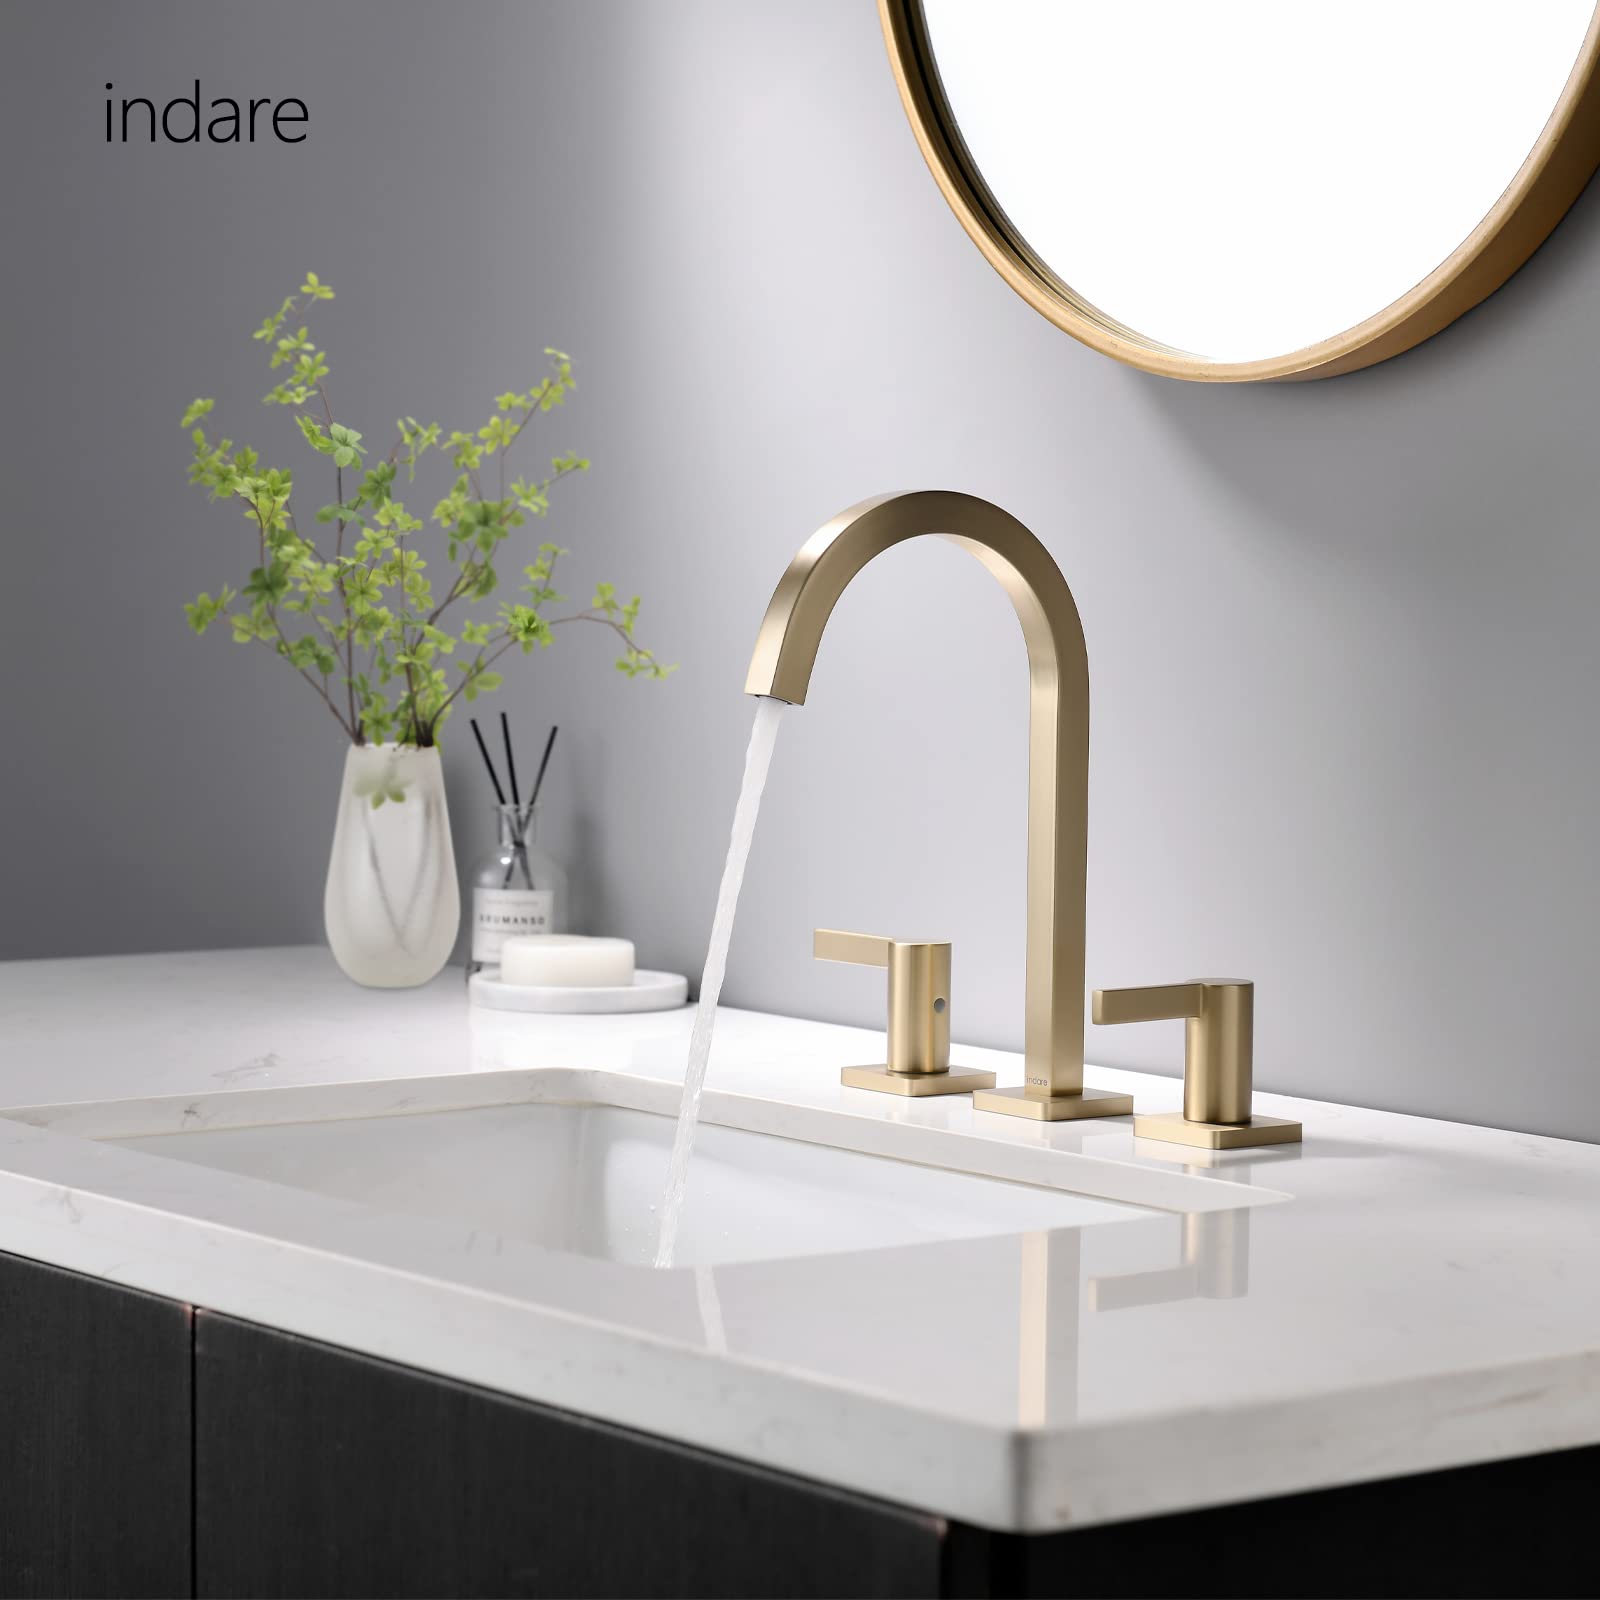 indare Brushed Gold Bathroom Faucet, 8 Inch Brass Widespread Bathroom Sink Faucet 3 Holes, Two Handles Bathroom Sink Faucet with Pop-Up Drain & Supply Lines, 110104-BG